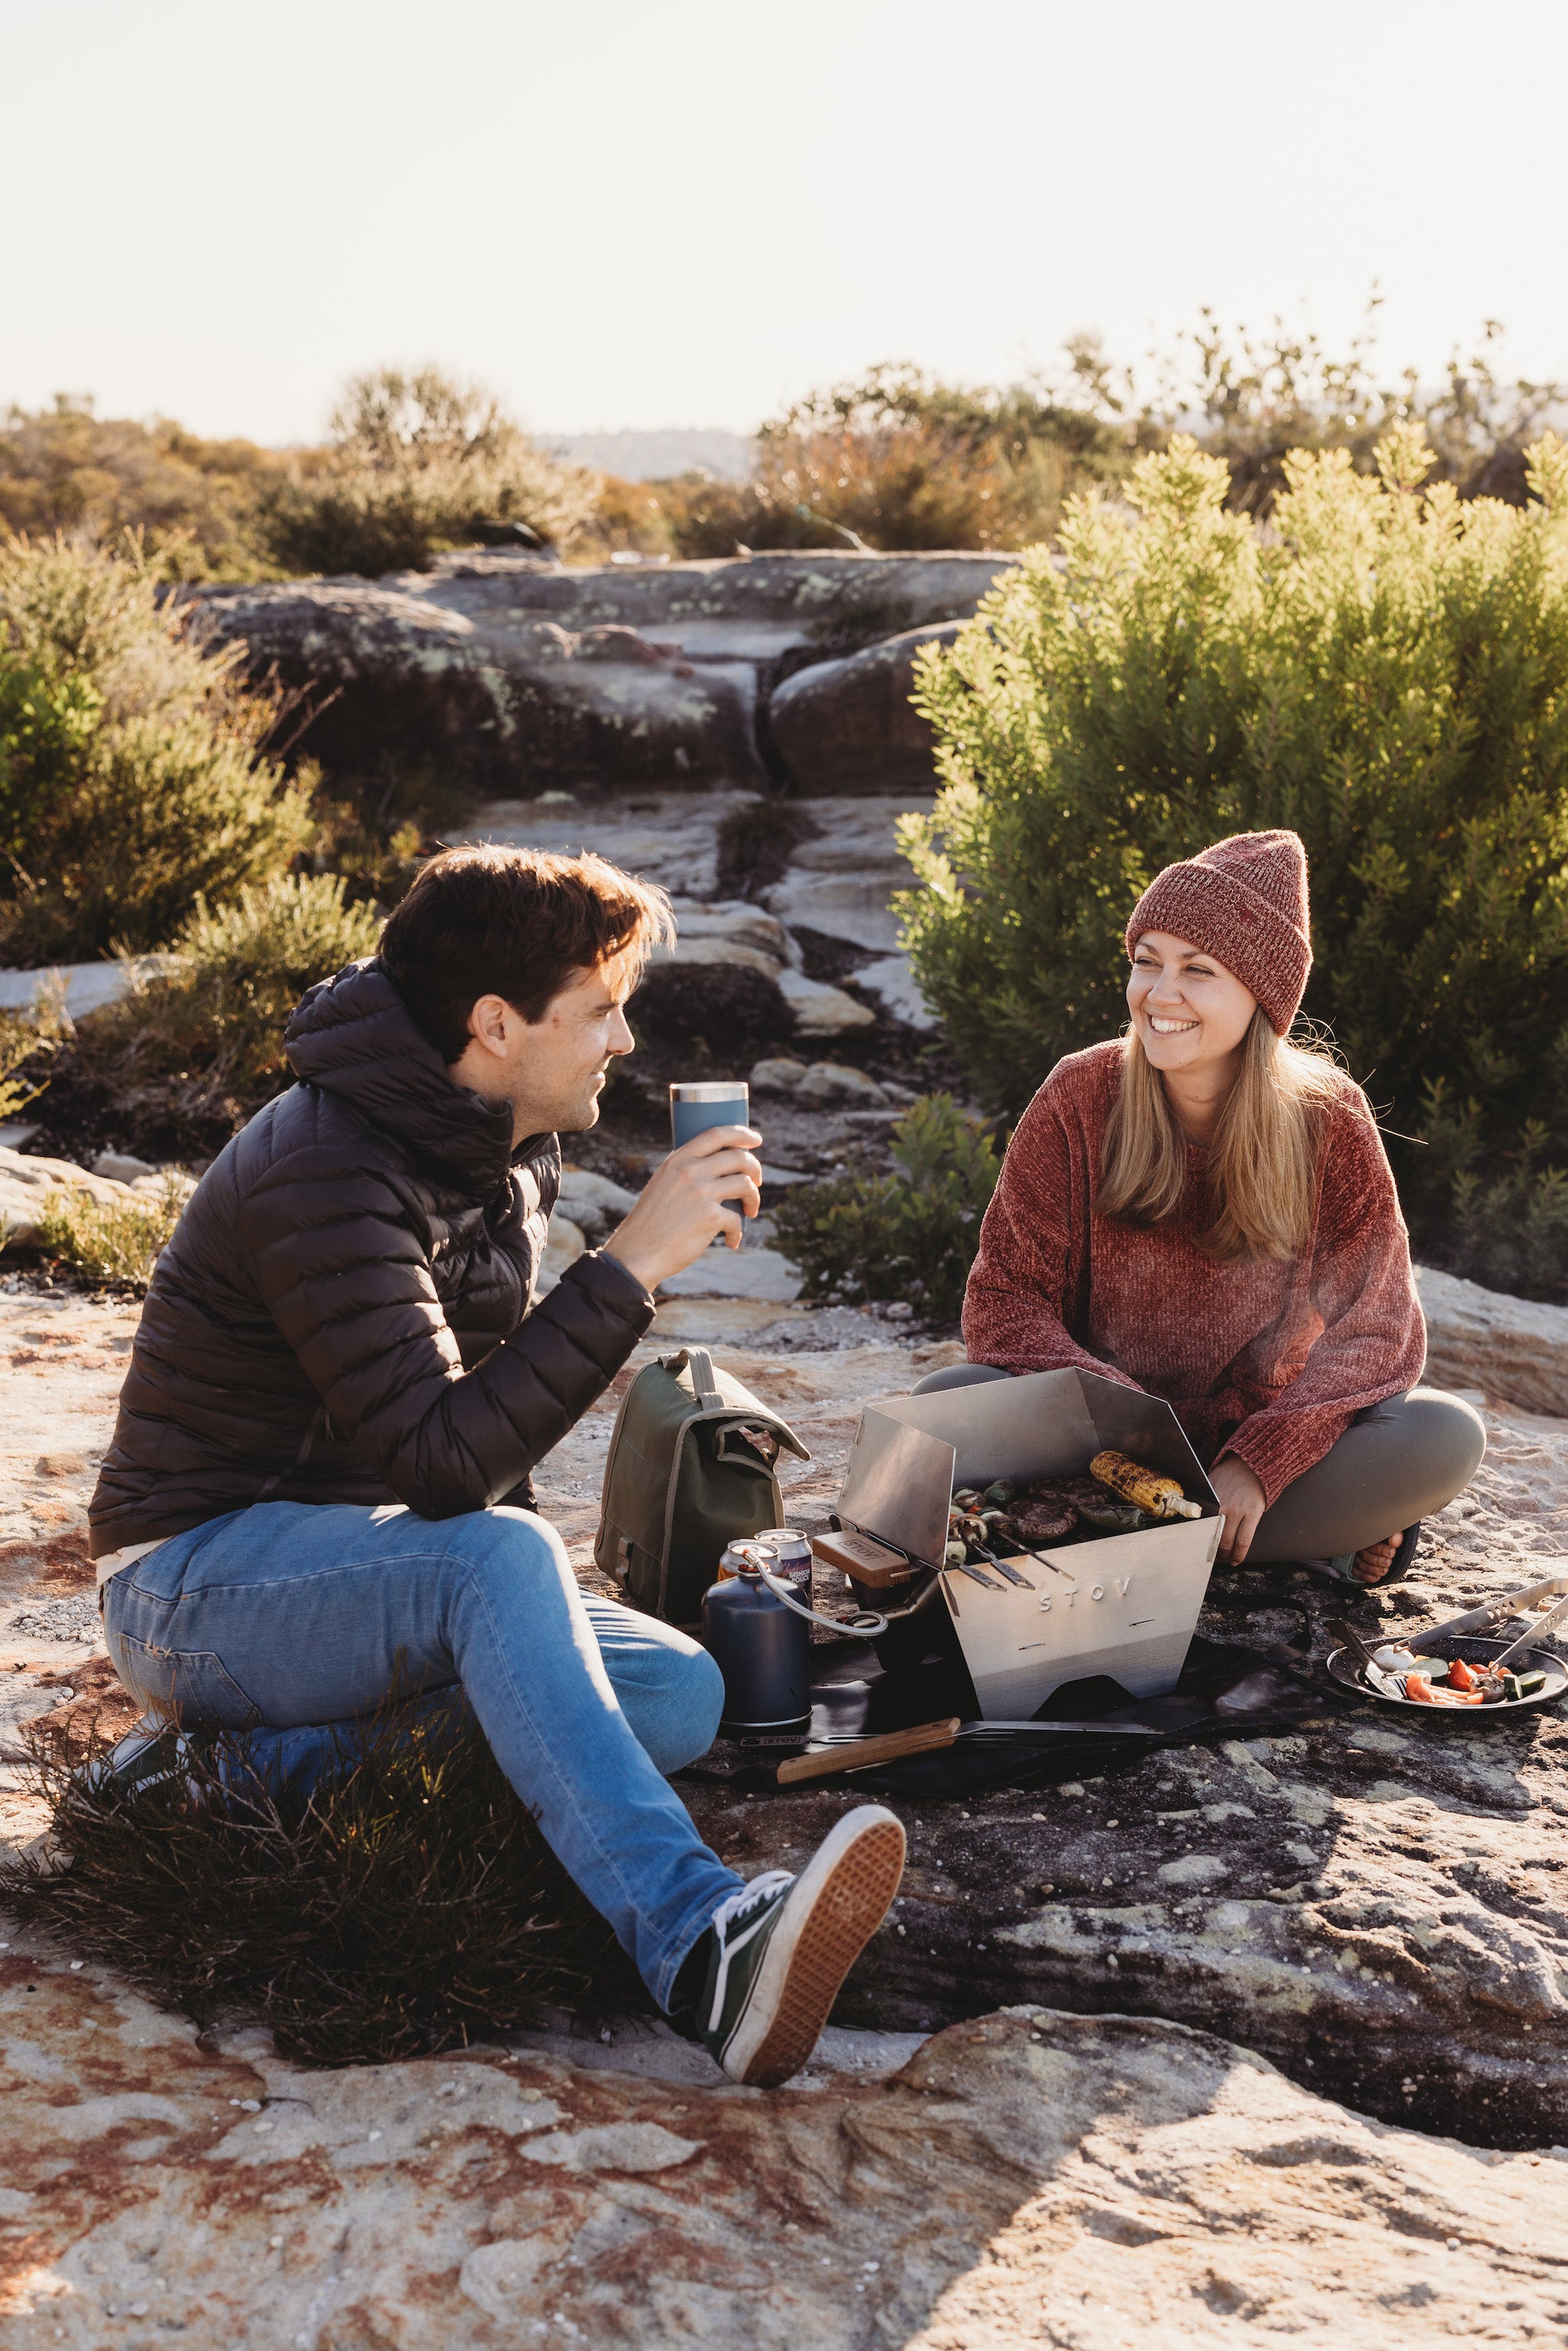 Designed with love the STOV BBQ makes your trips and adventures with friends easy and unforgettable. 